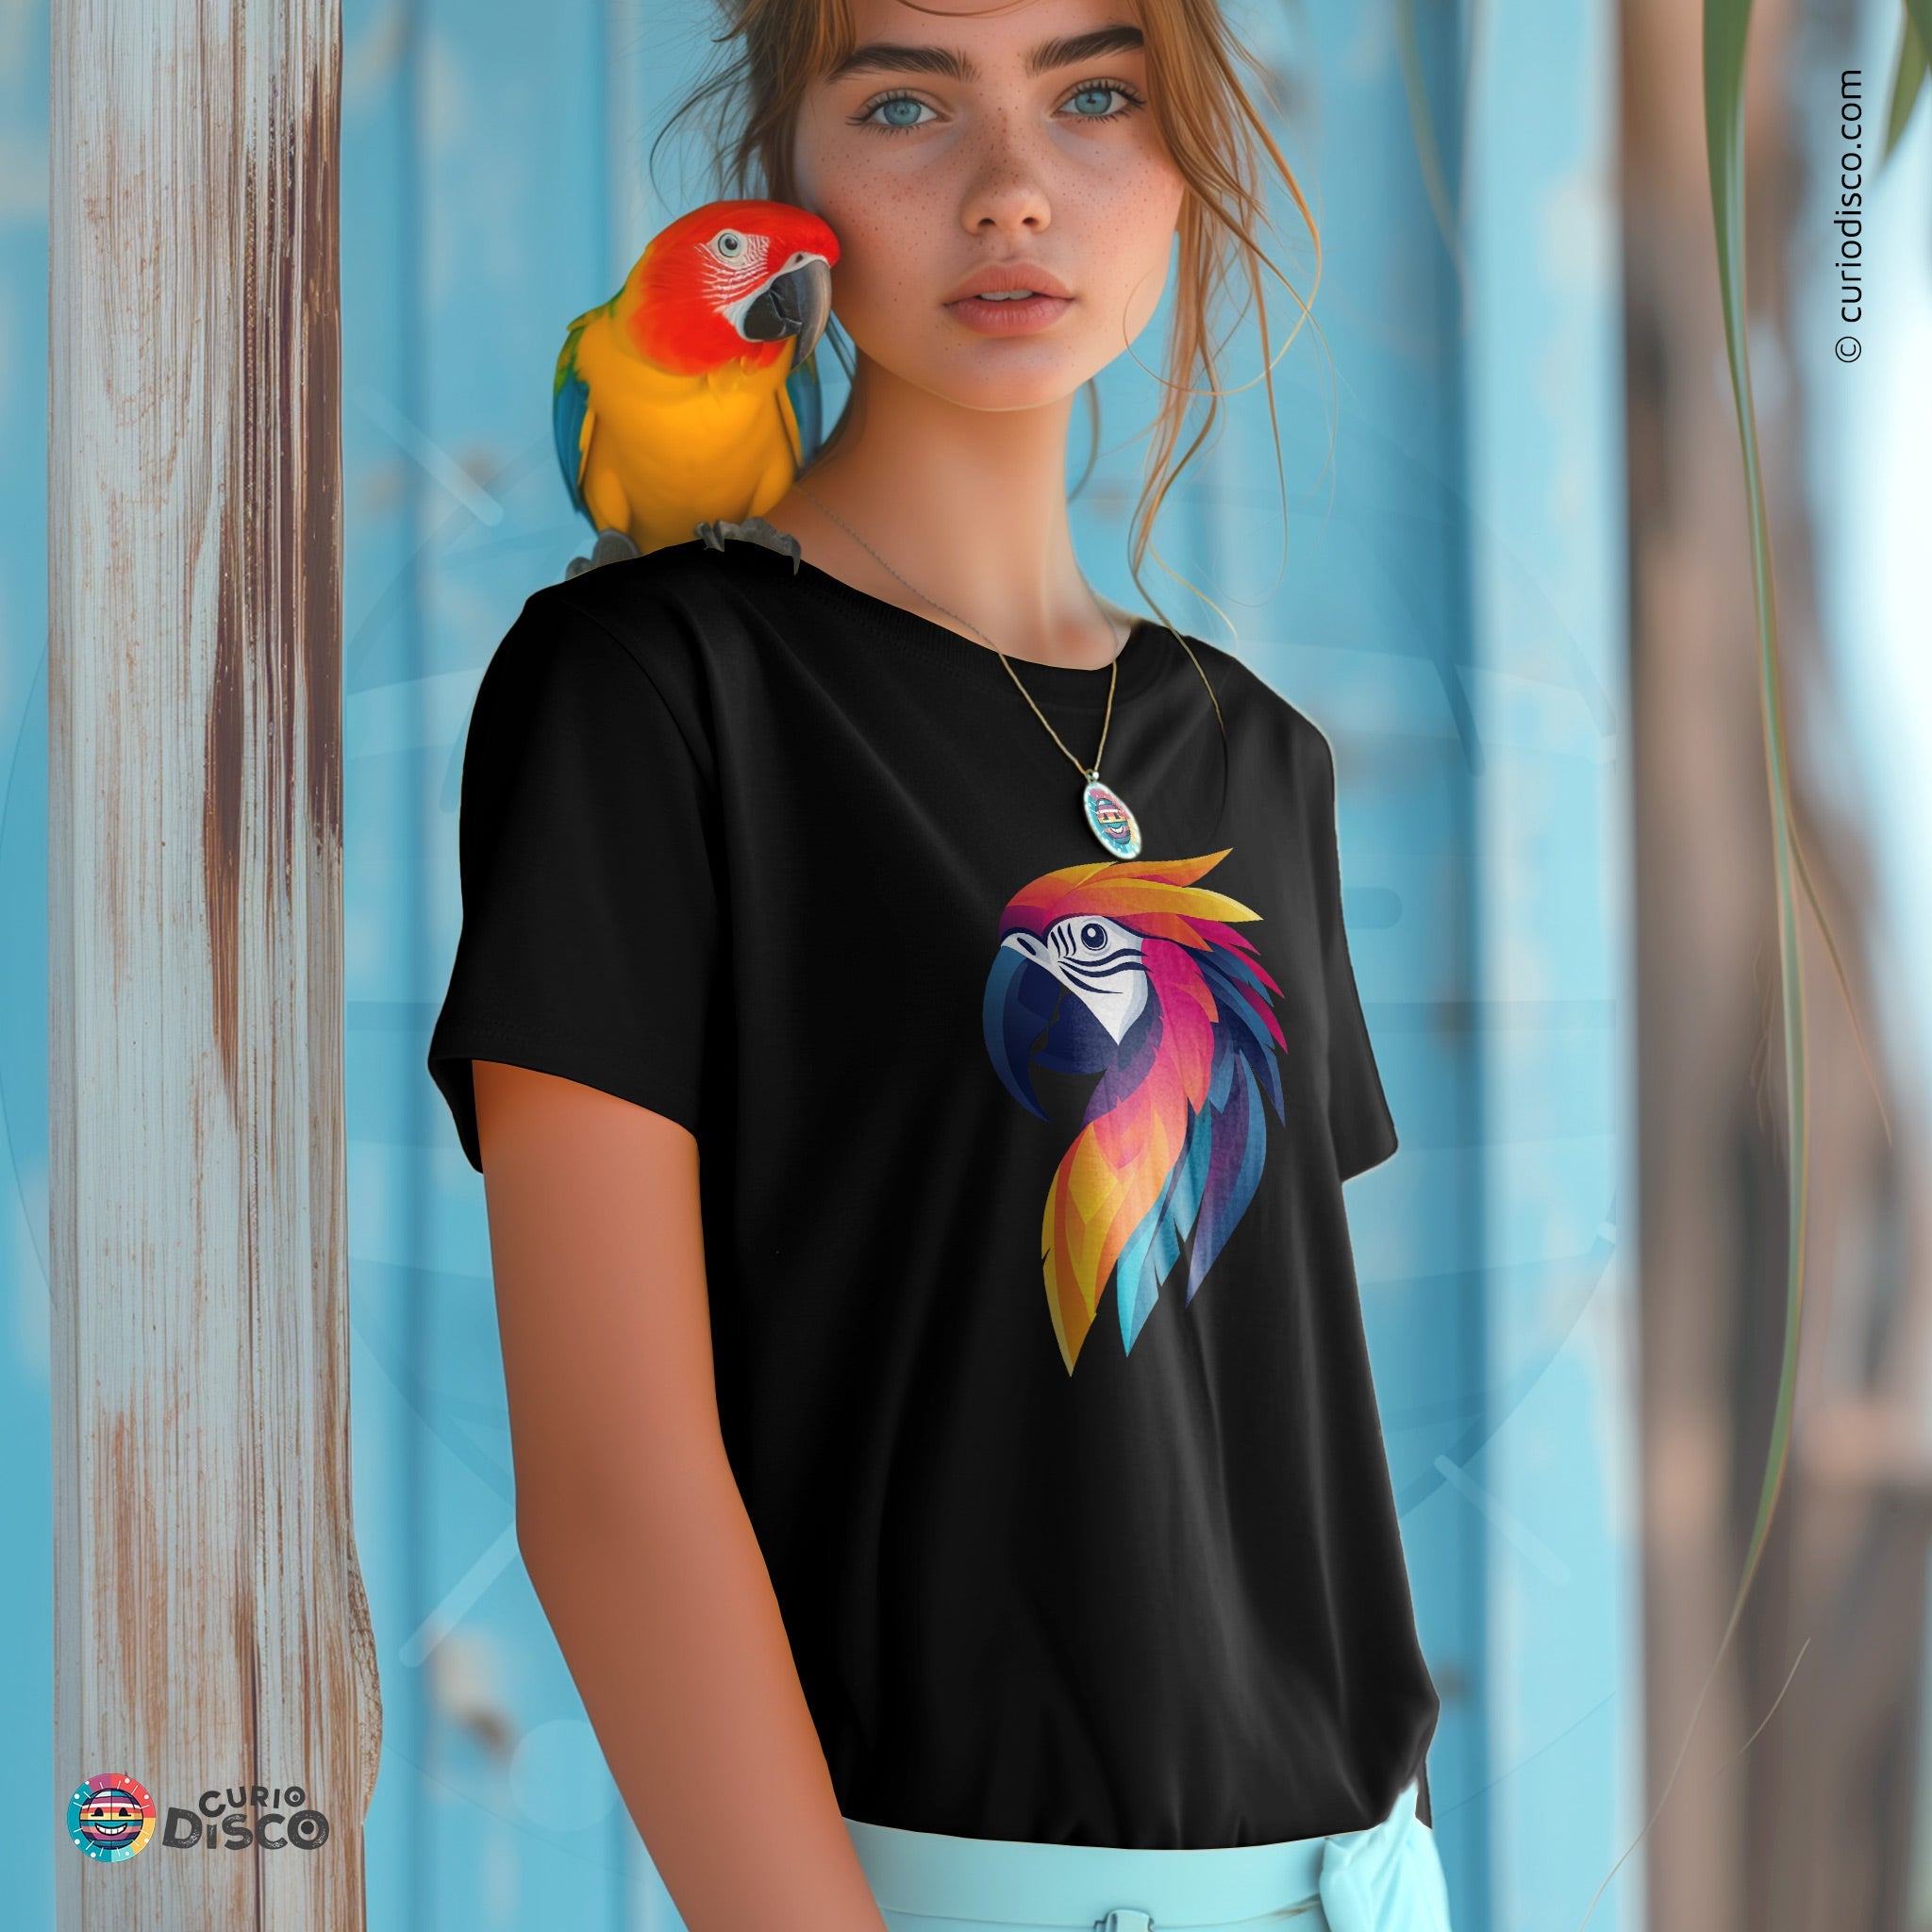 Stylish Macaw Parrot shirt, perfect for bird watching and bird lovers. Ideal as a kawaii clothes item, earth day shirt, and safari tshirt. Great bird nerd and bird watcher gift, suitable for national park visits, available in plus size.